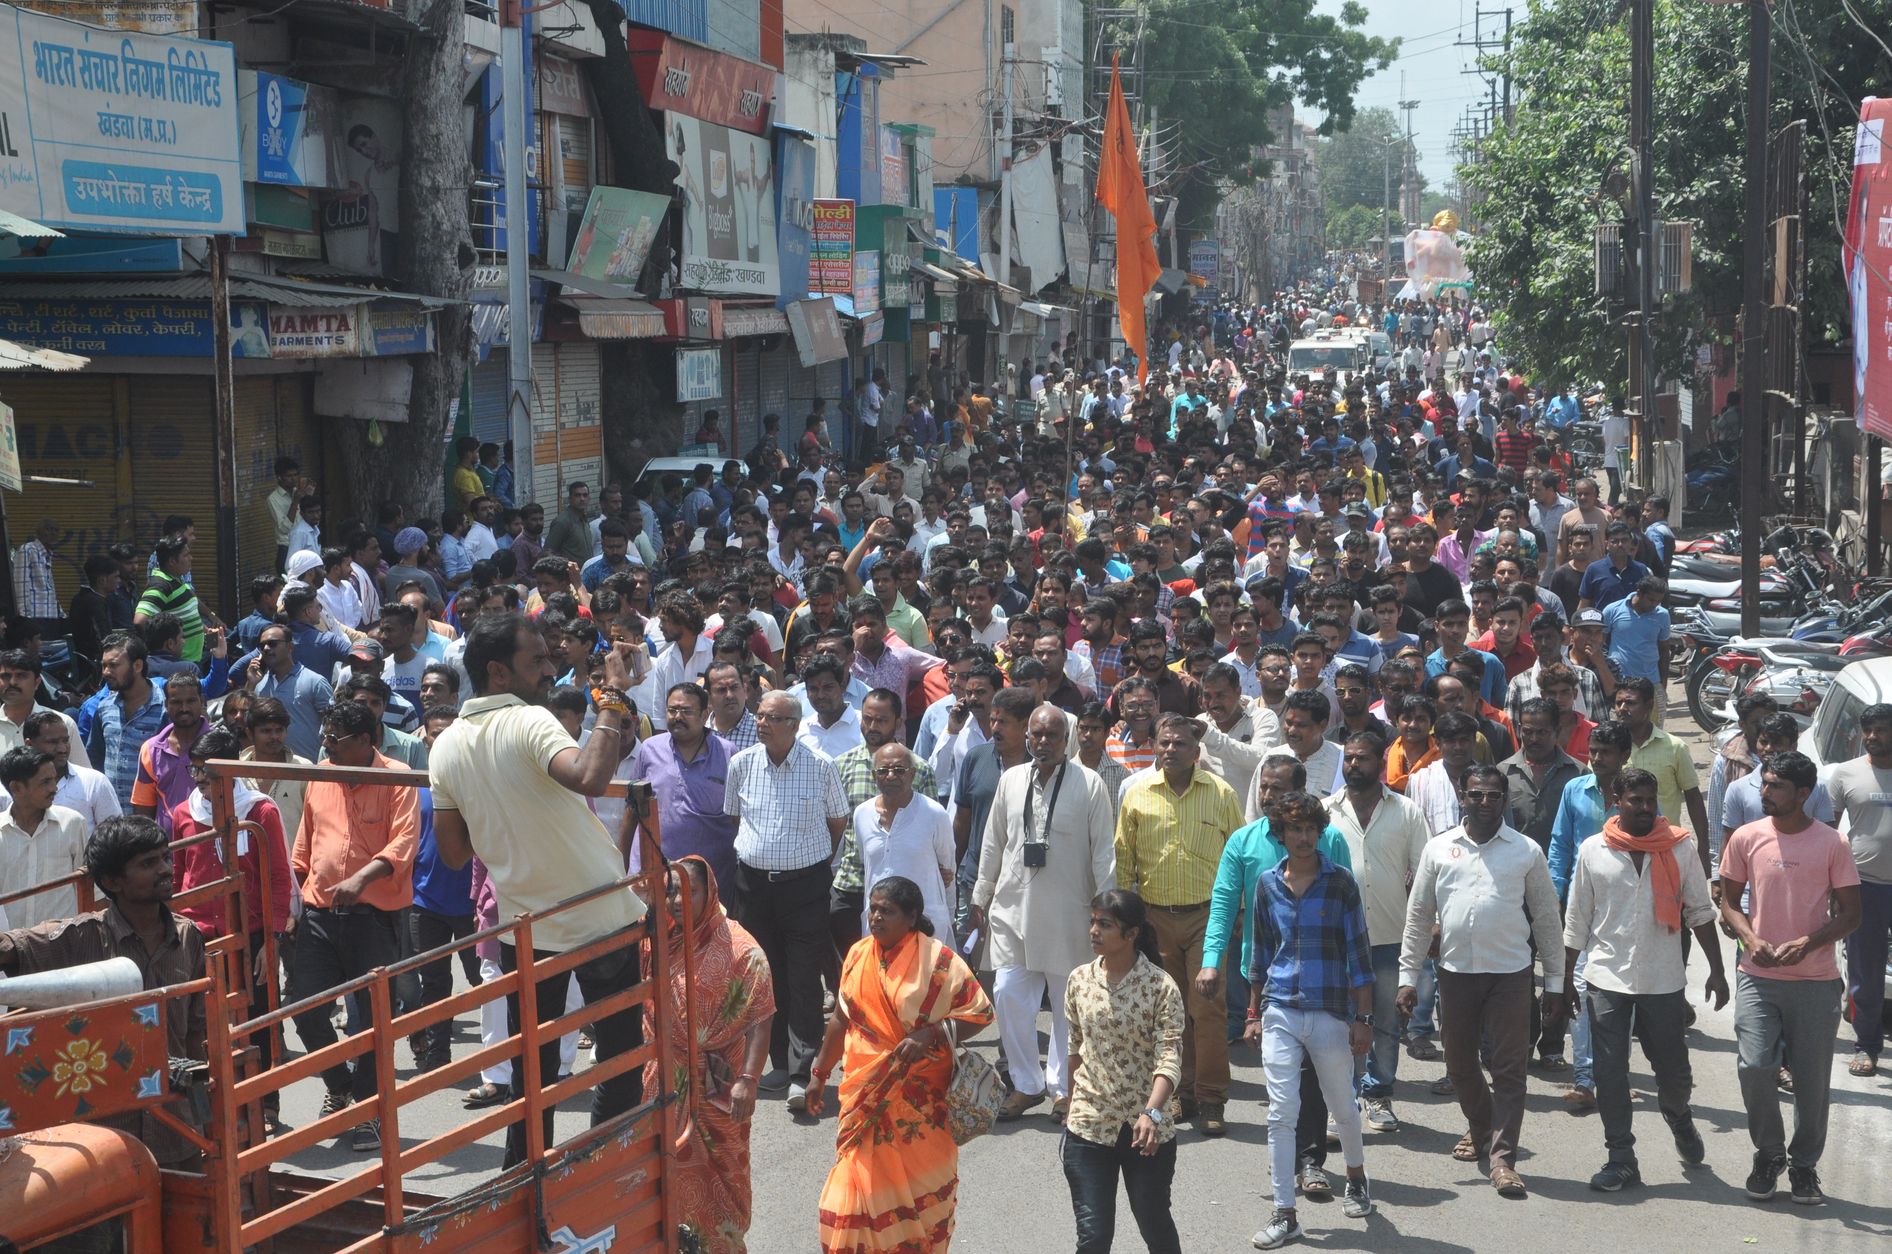 MP Big news: Khandwa stopped in protest of Hindu leader's arrest